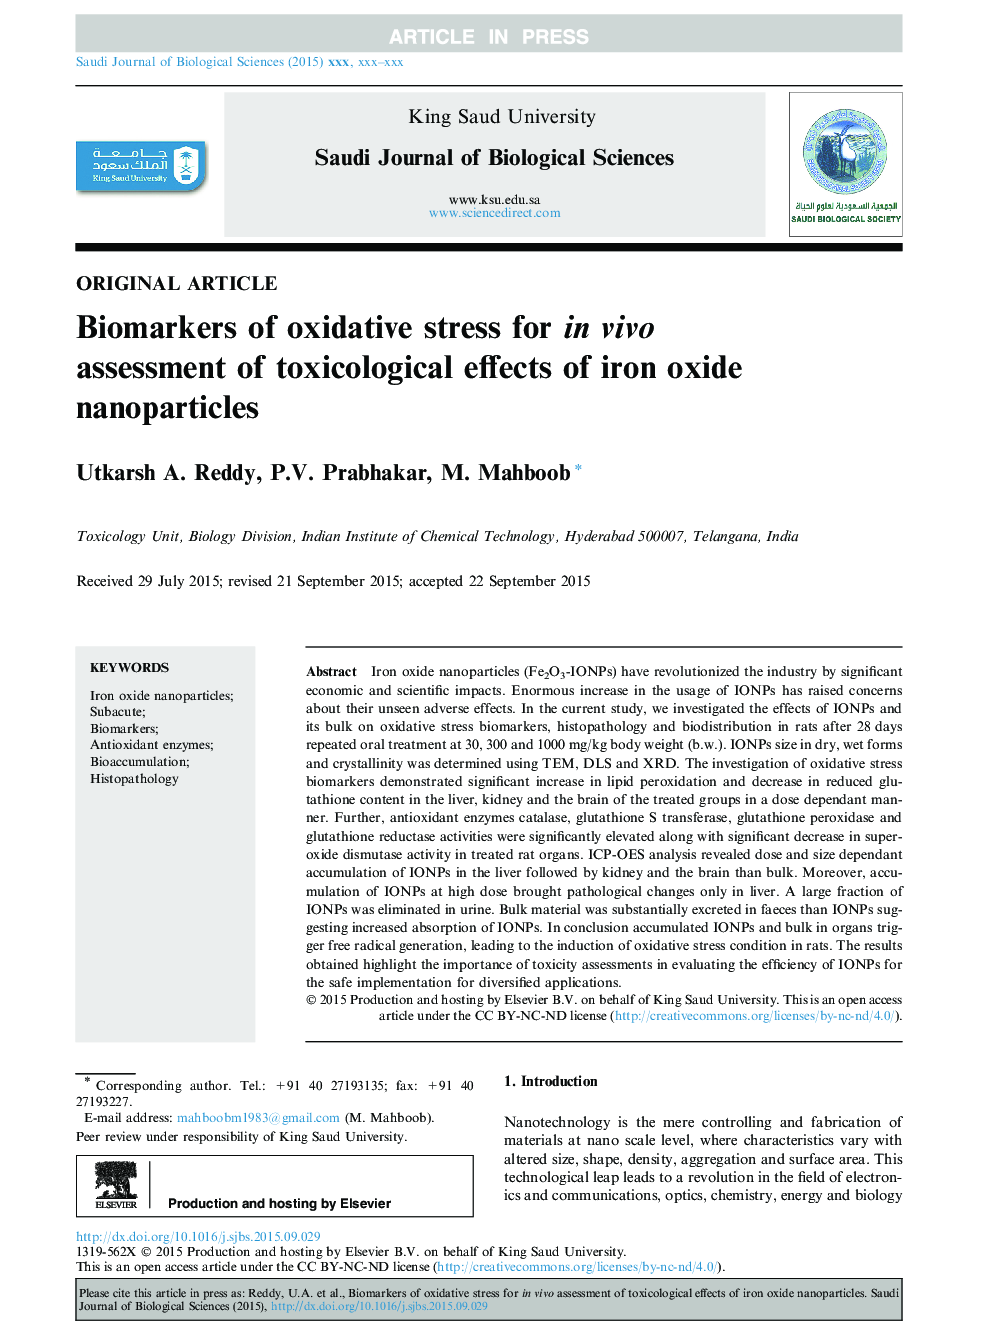 Biomarkers of oxidative stress for in vivo assessment of toxicological effects of iron oxide nanoparticles